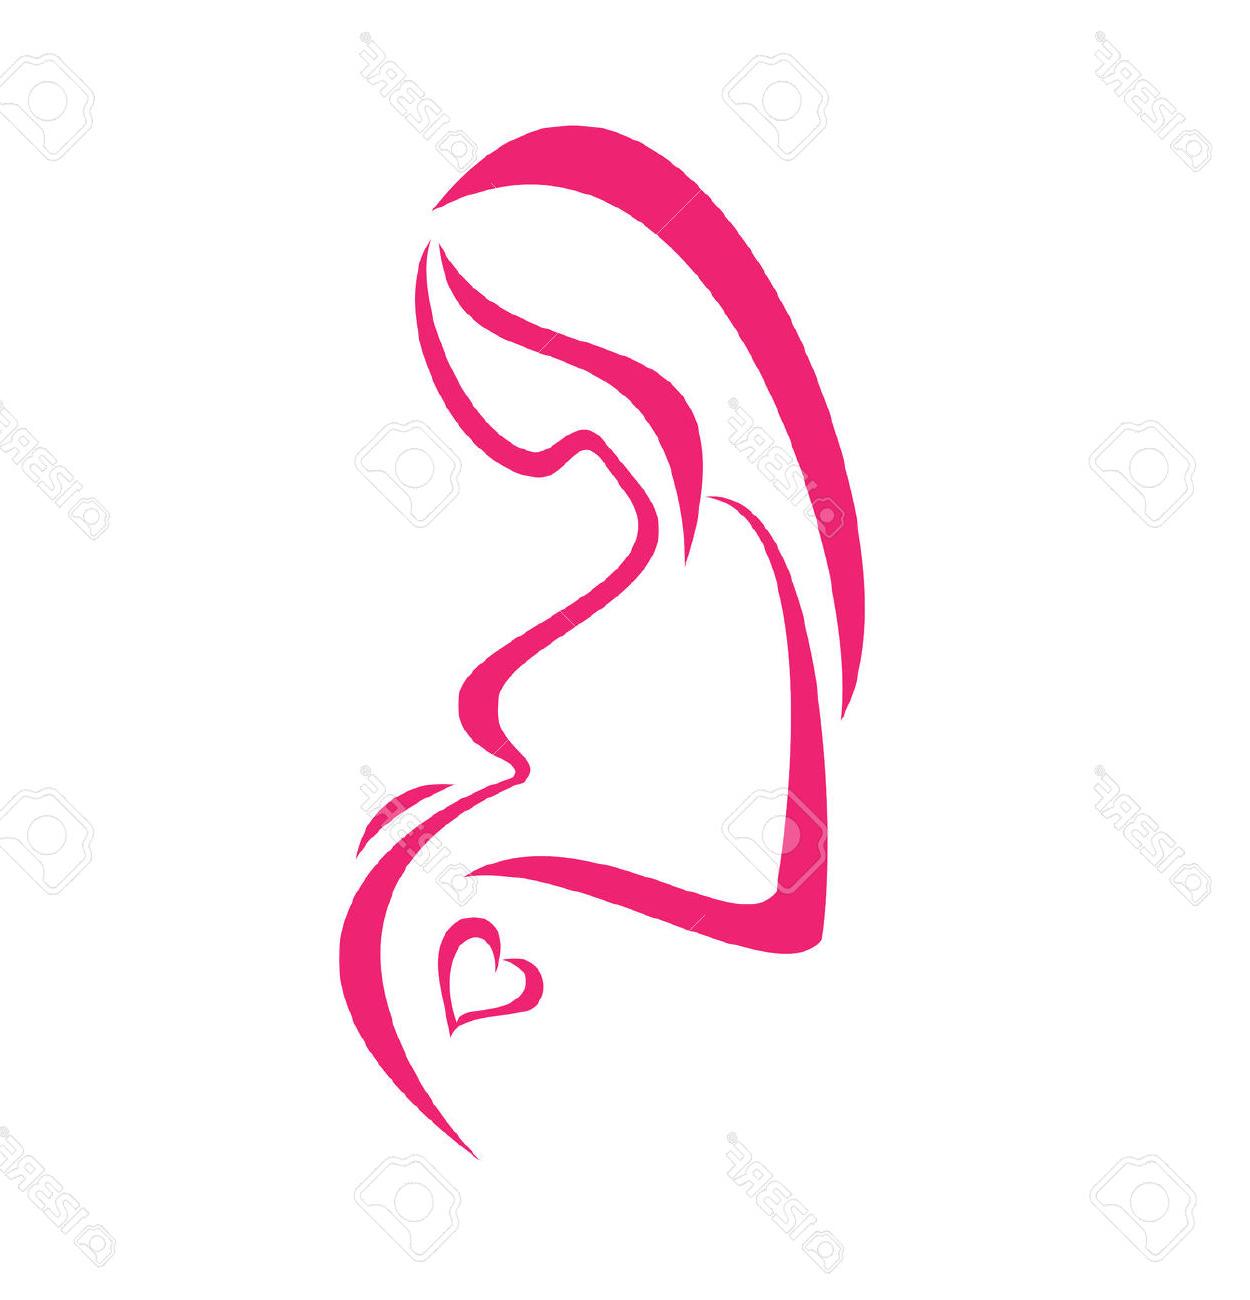 Free download best . Pregnancy clipart pregnant lady